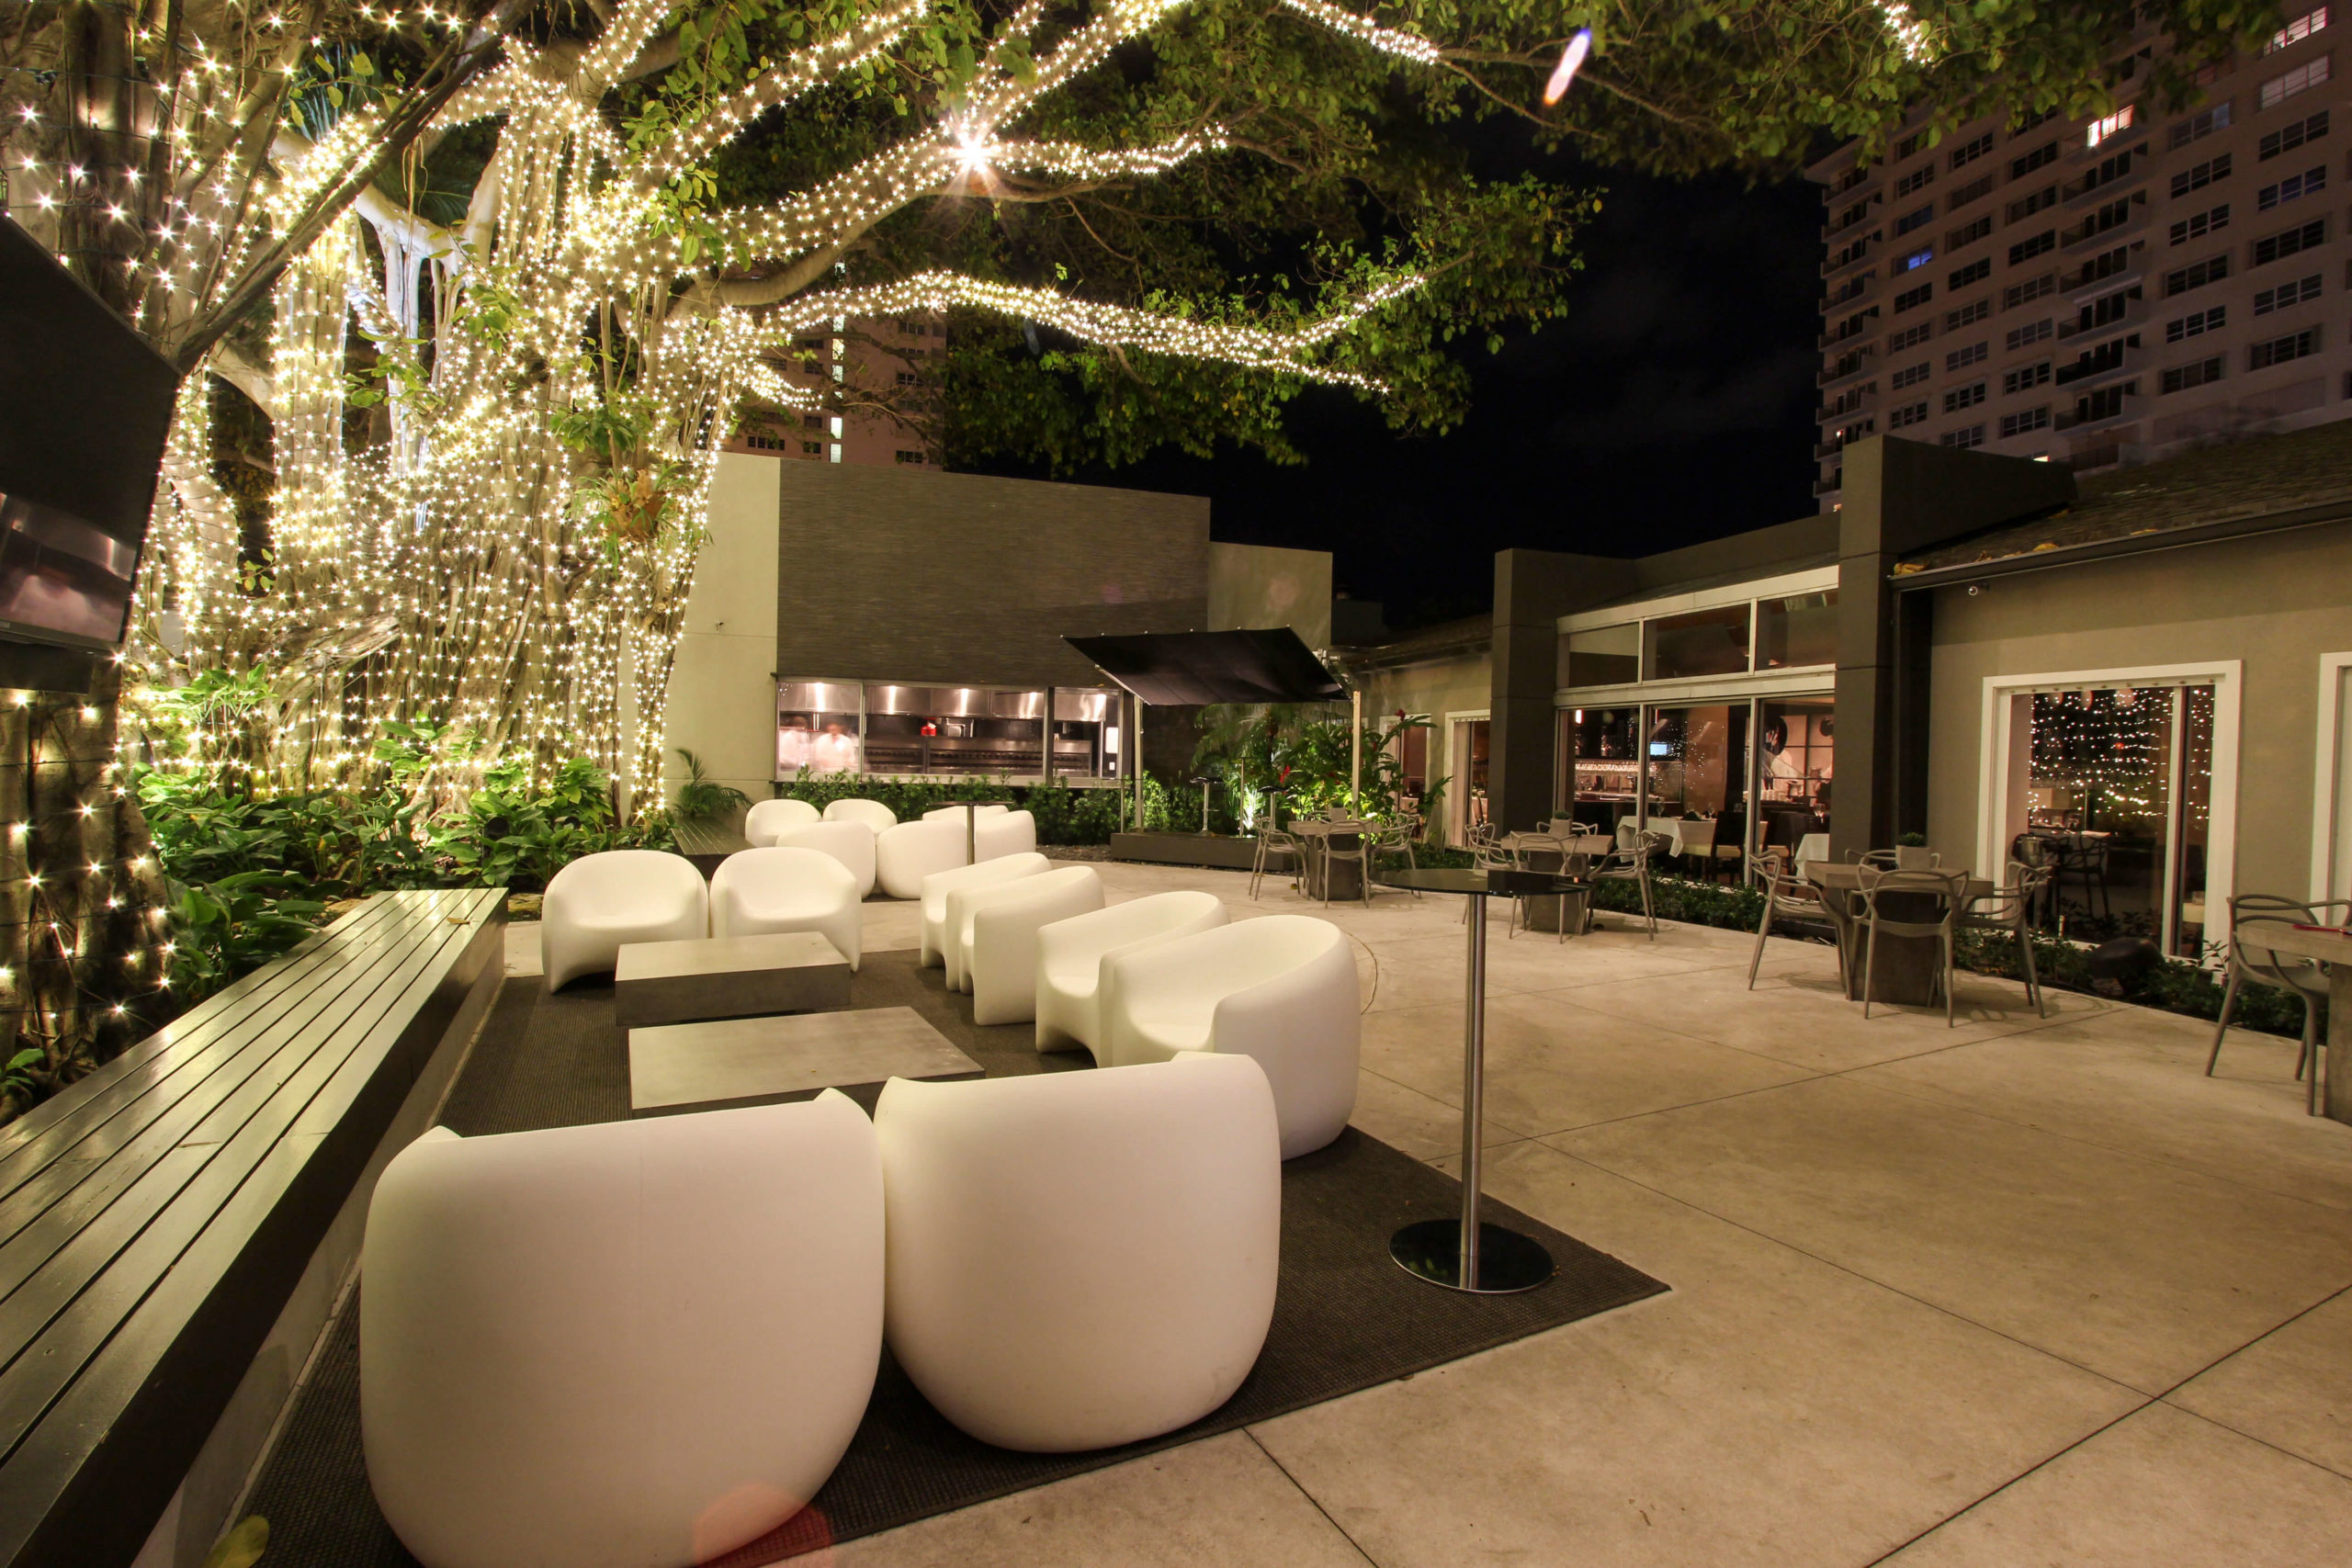 Who Offers the Best Fine Dining in Fort Lauderdale?